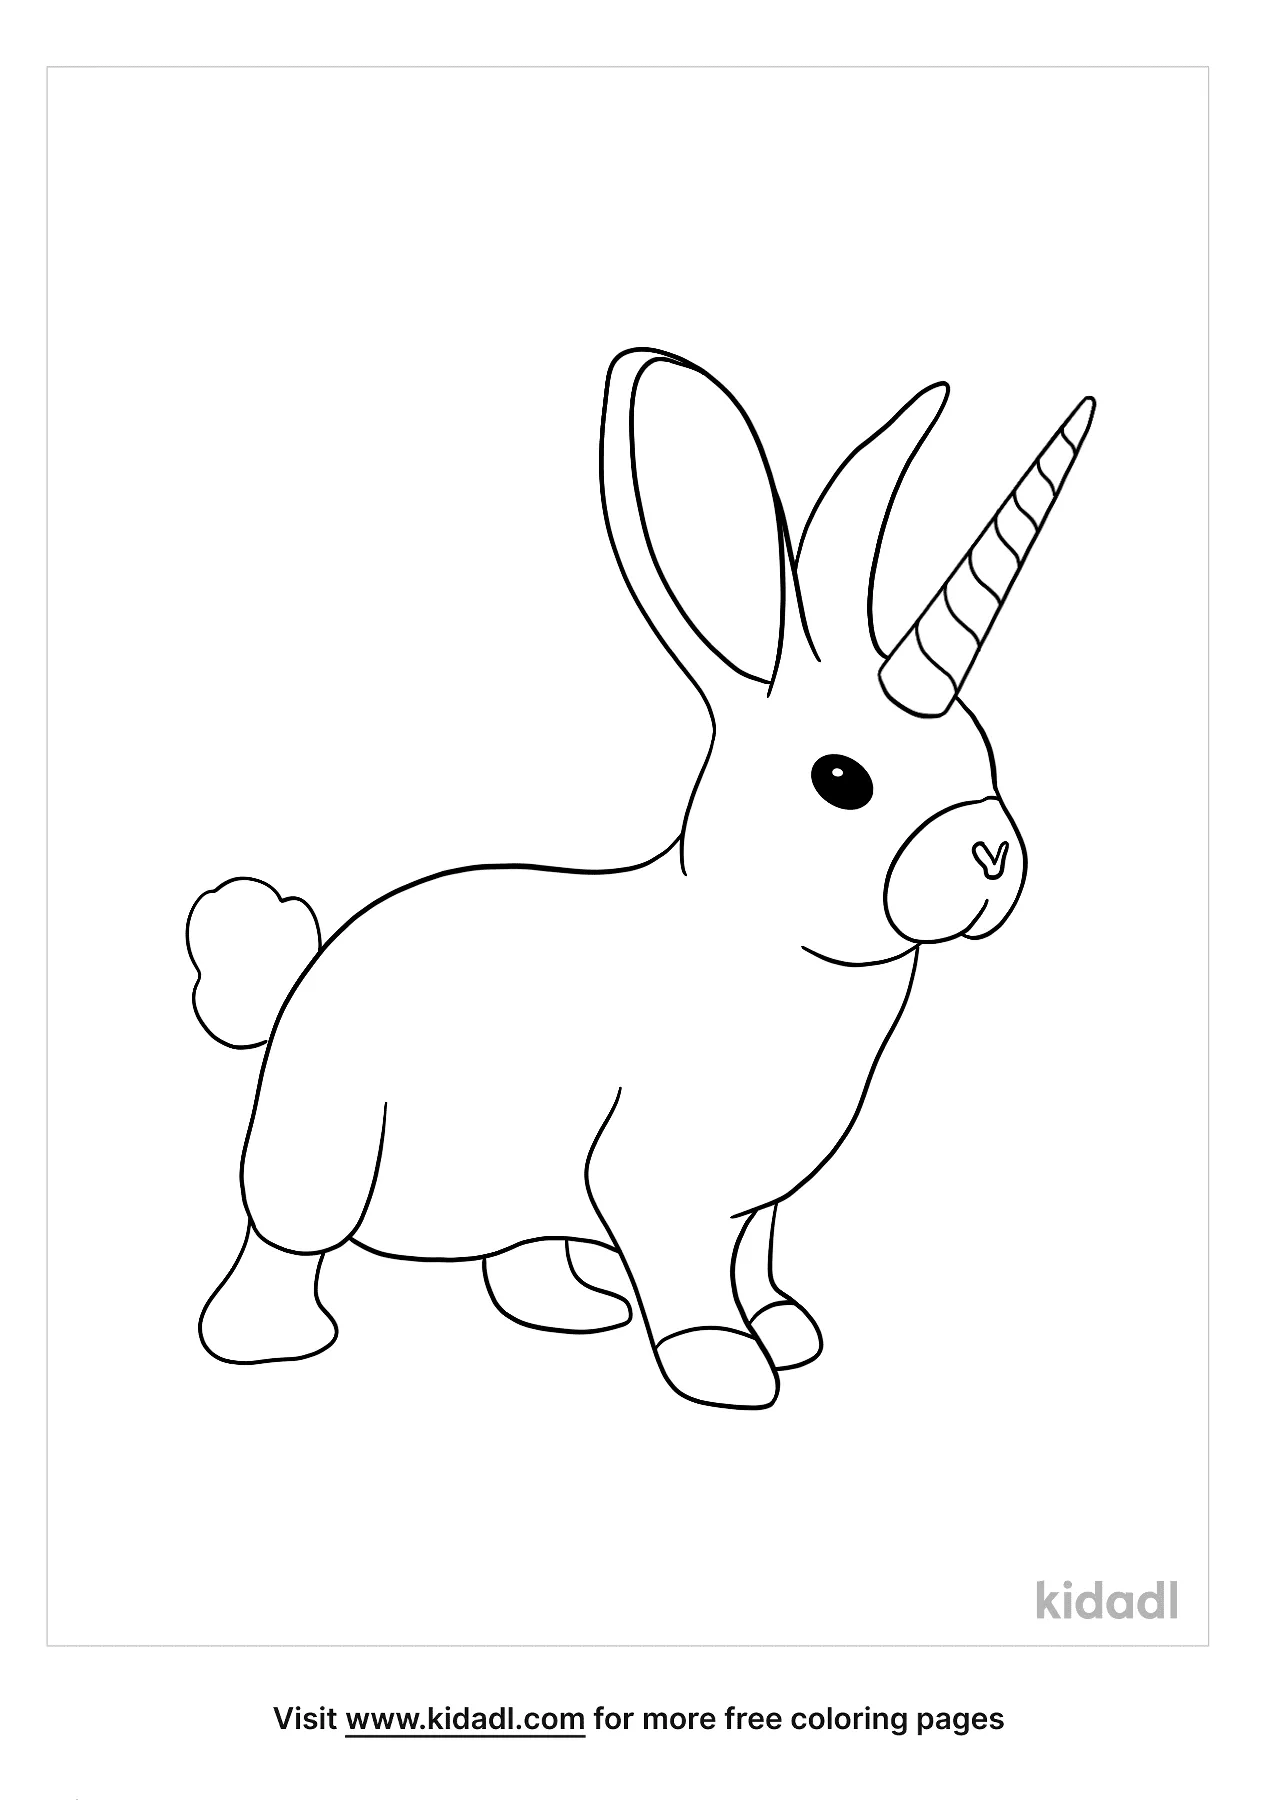 bunny with unicorn horn coloring page free cartoons coloring page kidadl